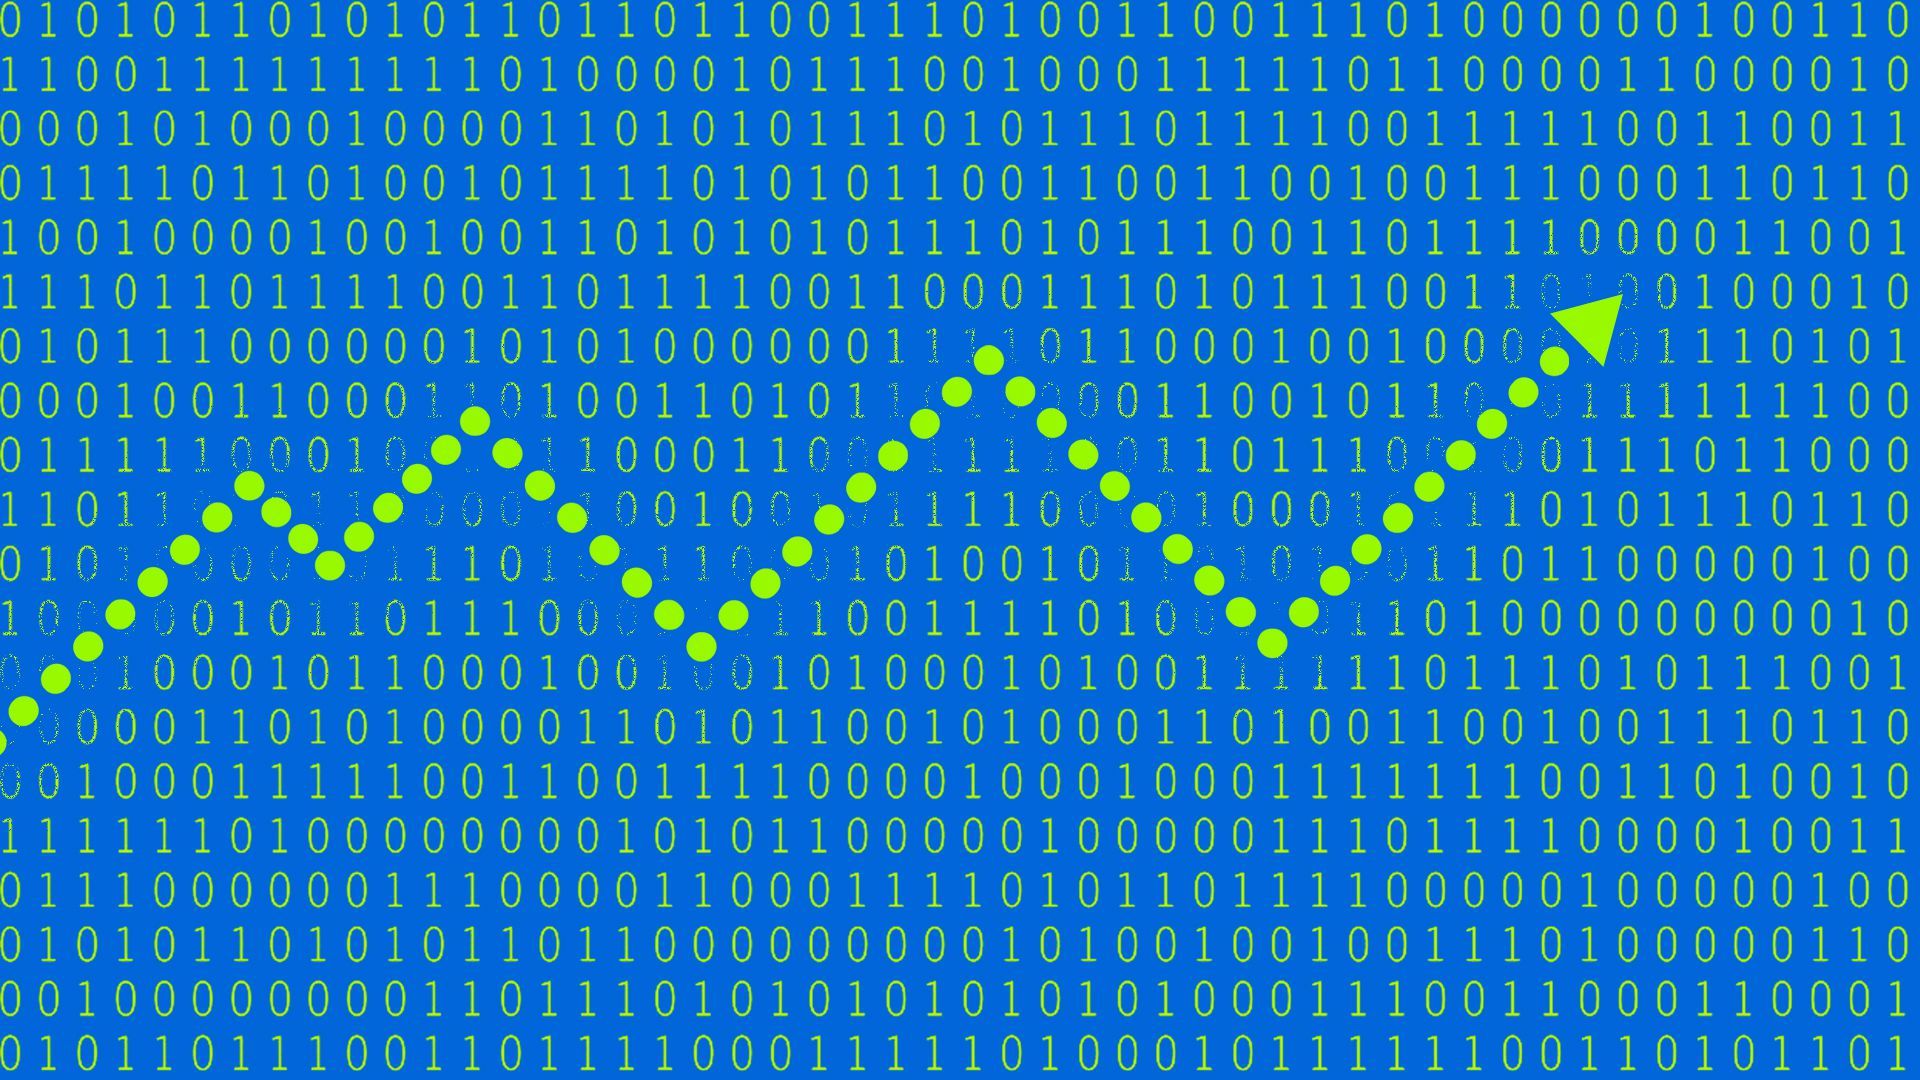 Illustration of an upward trending, dotted stock line over a pattern of binary code.